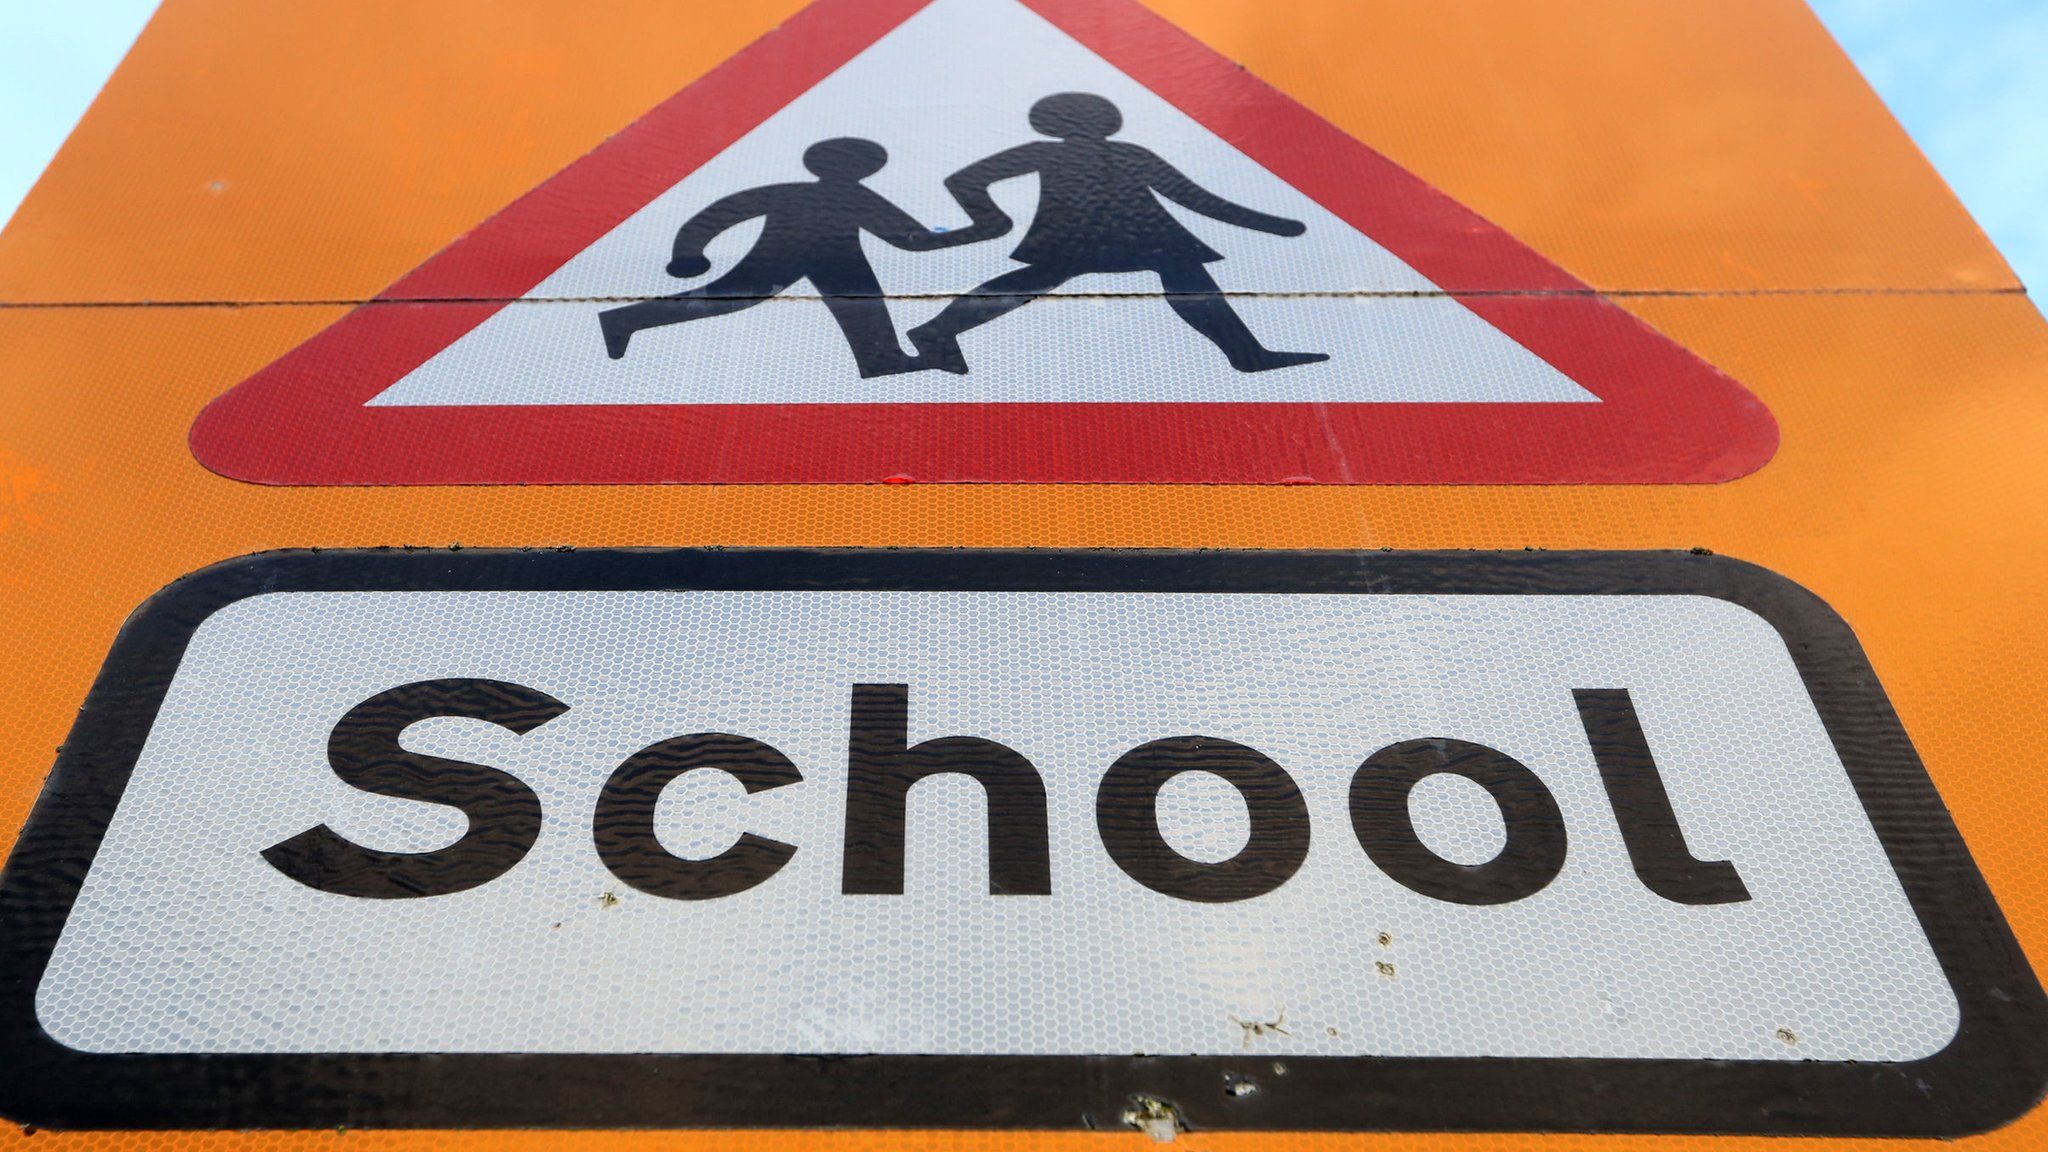 School safety road sign